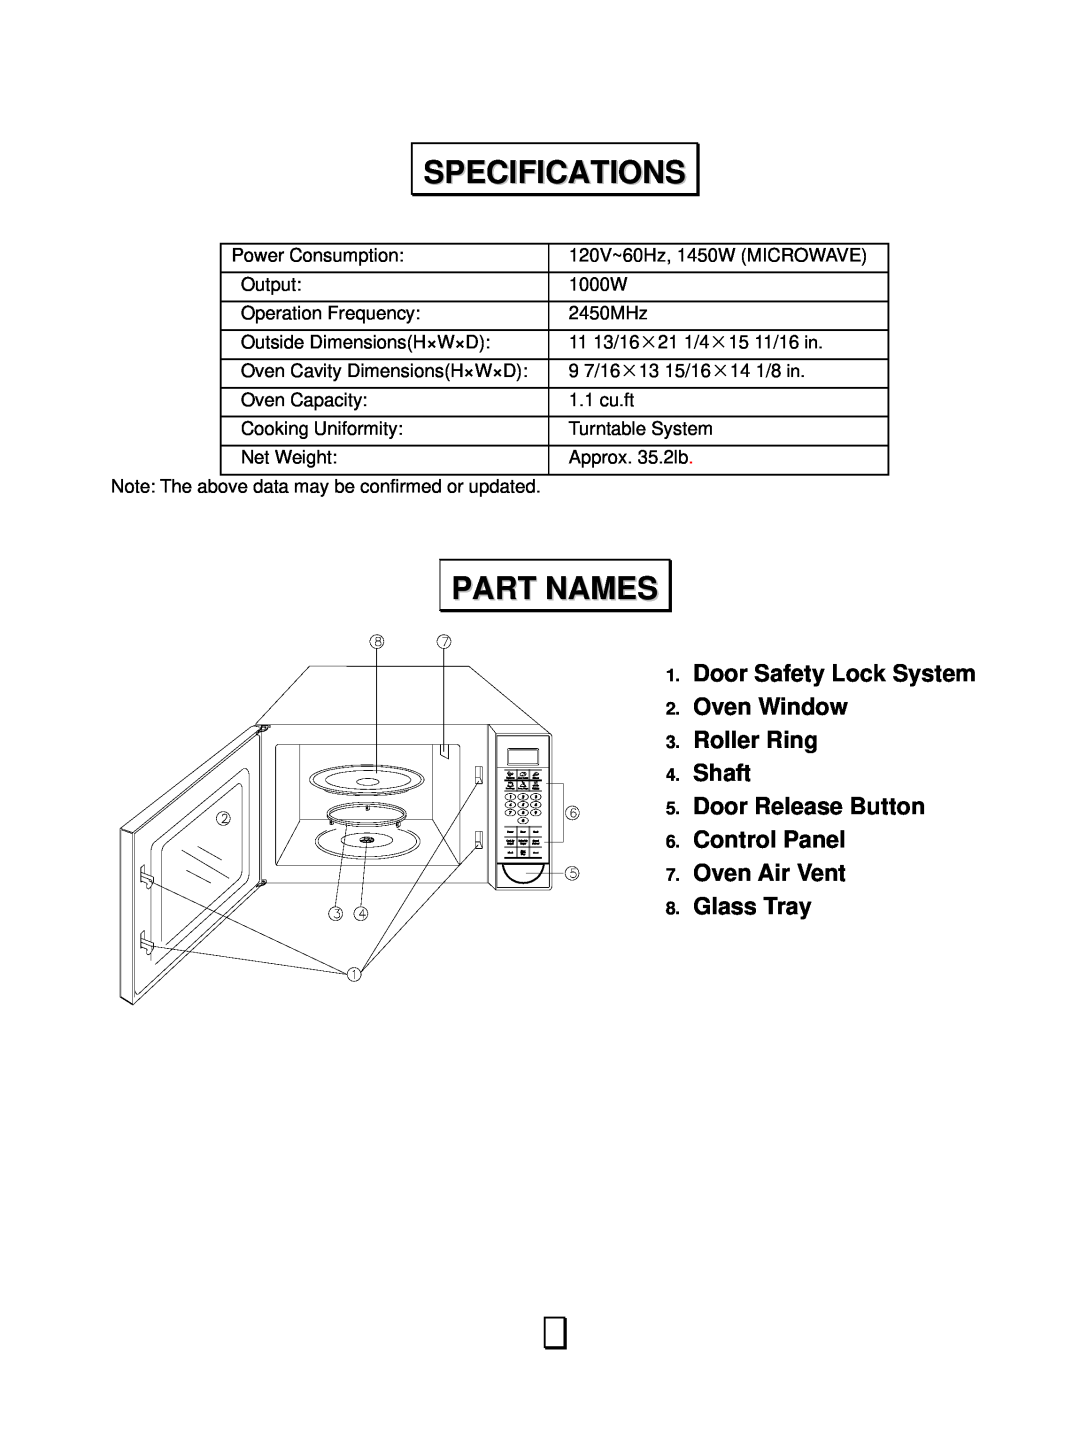 RCA RMW1143 Specifications, Part Names, Door Safety Lock System Oven Window Roller Ring, Oven Air Vent Glass Tray 